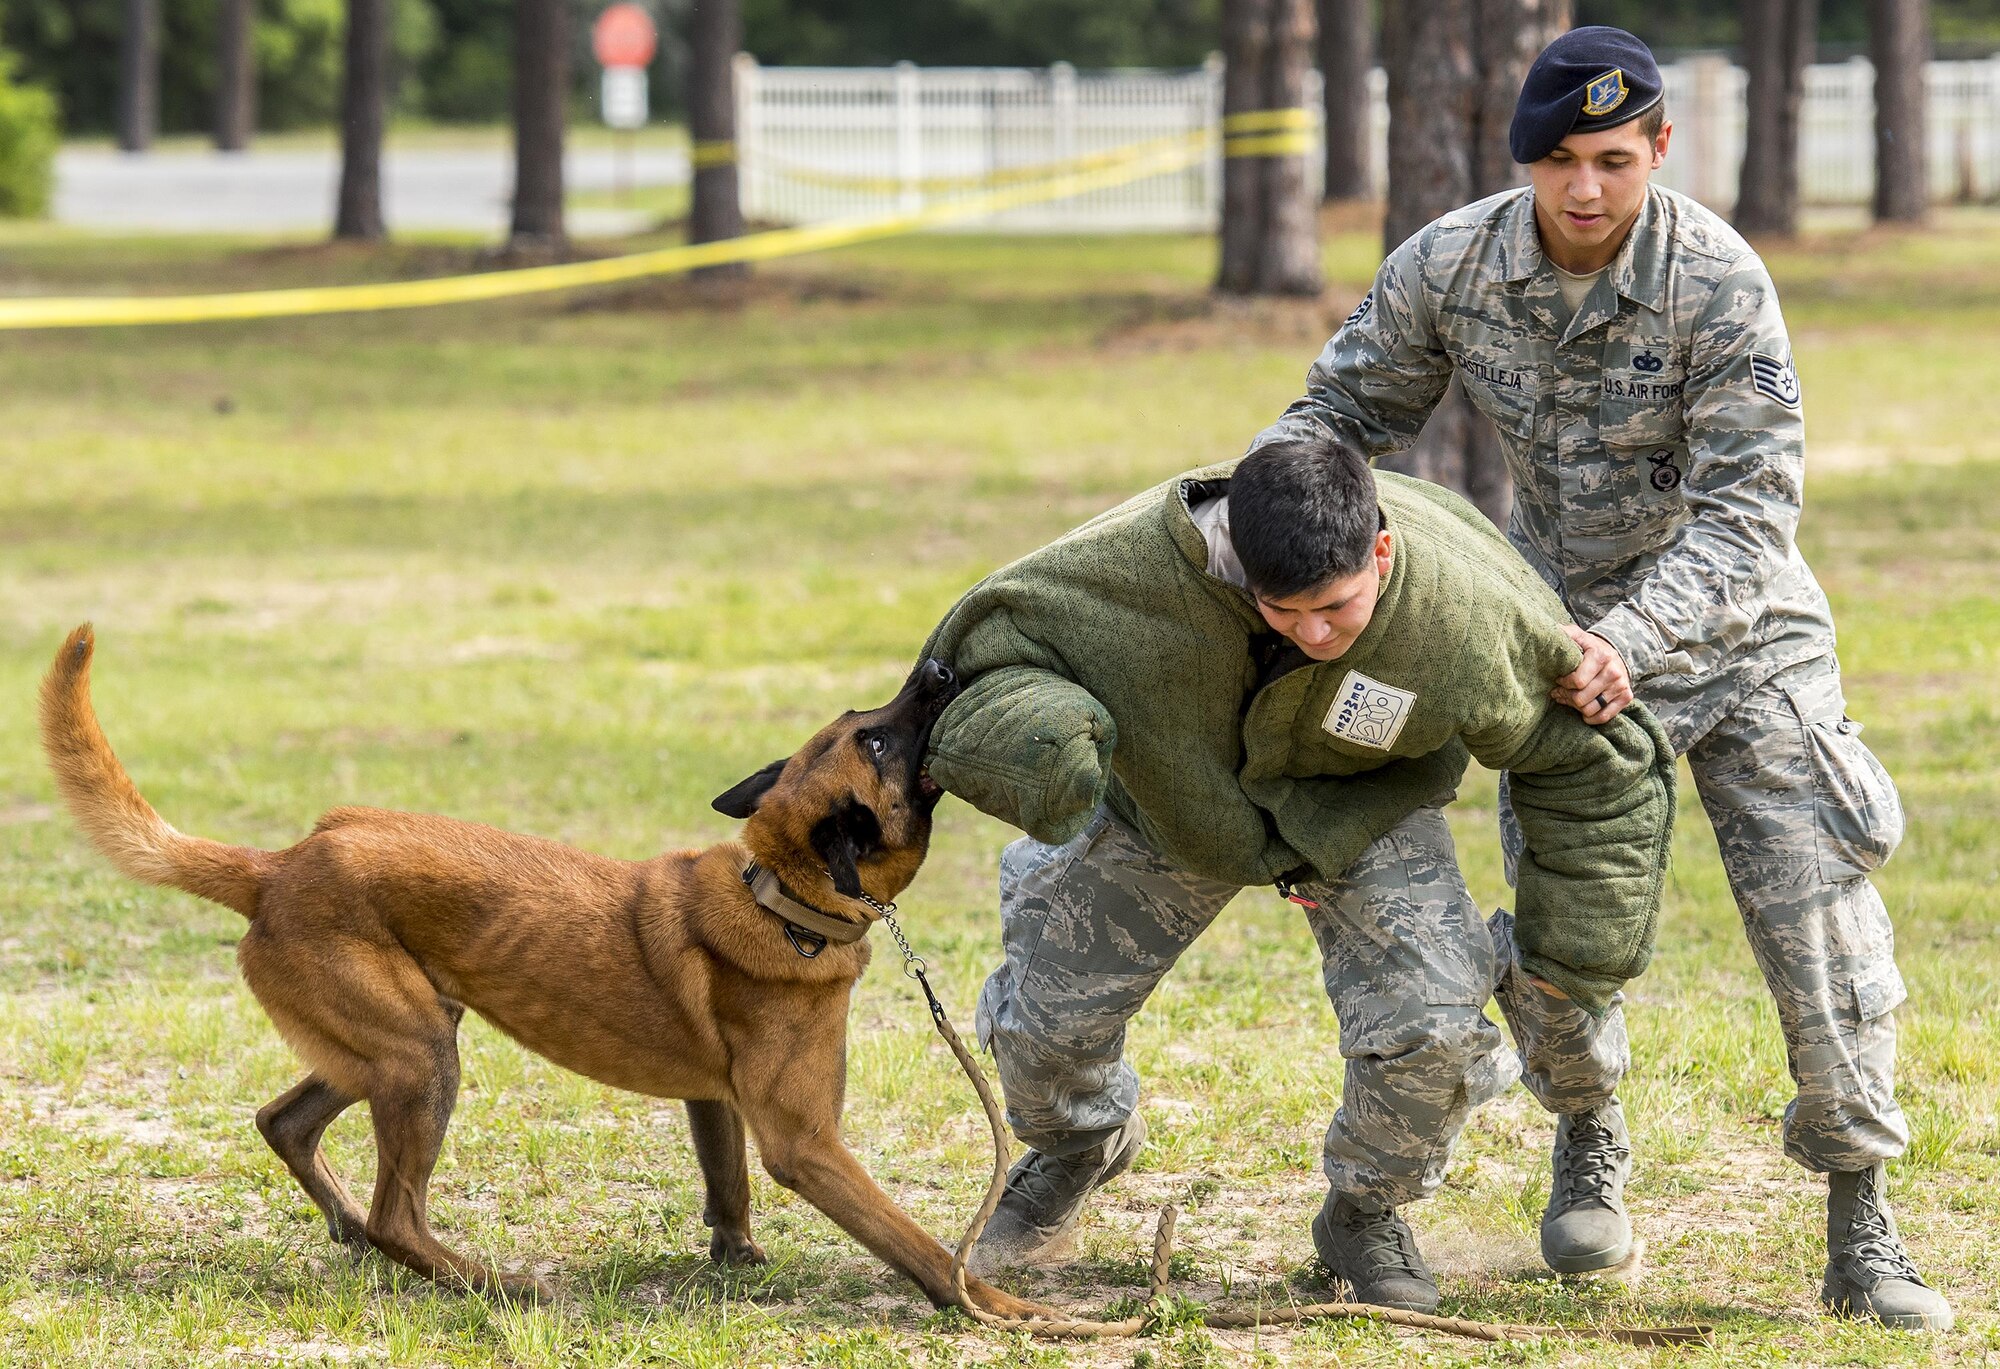 Military Working Dog Arko helps his handler, Staff Sgt. Michael Castilleja, 96th Security Forces Squadron, put the “bad guy” on the ground during a demonstration for Eglin Elementary School kids May 18 at Eglin Air Force Base, Fla. The event was in celebration of National Police Week. More than 100 children watched the demonstration. (U.S. Air Force photo/Samuel King Jr.)